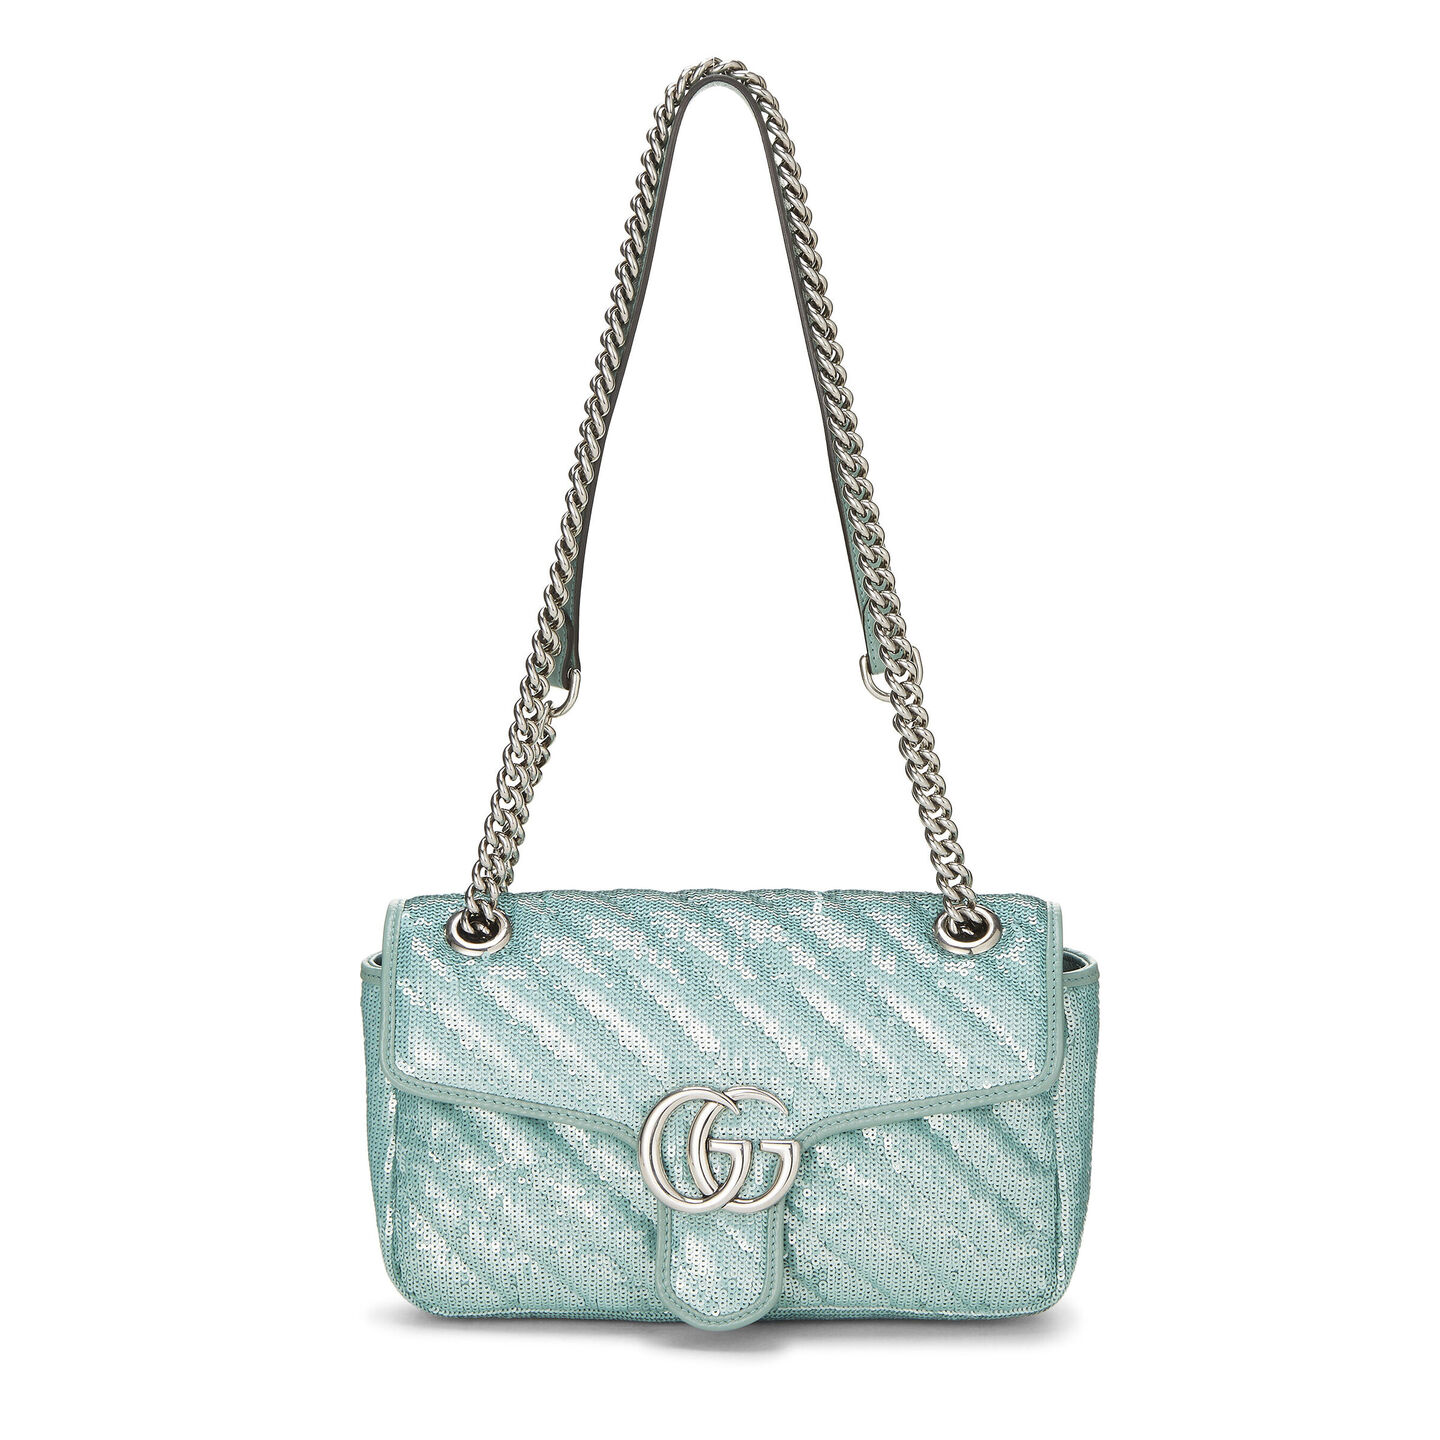 GUCCI BLUE SEQUIN GG MARMONT SHOULDER BAG SMALL